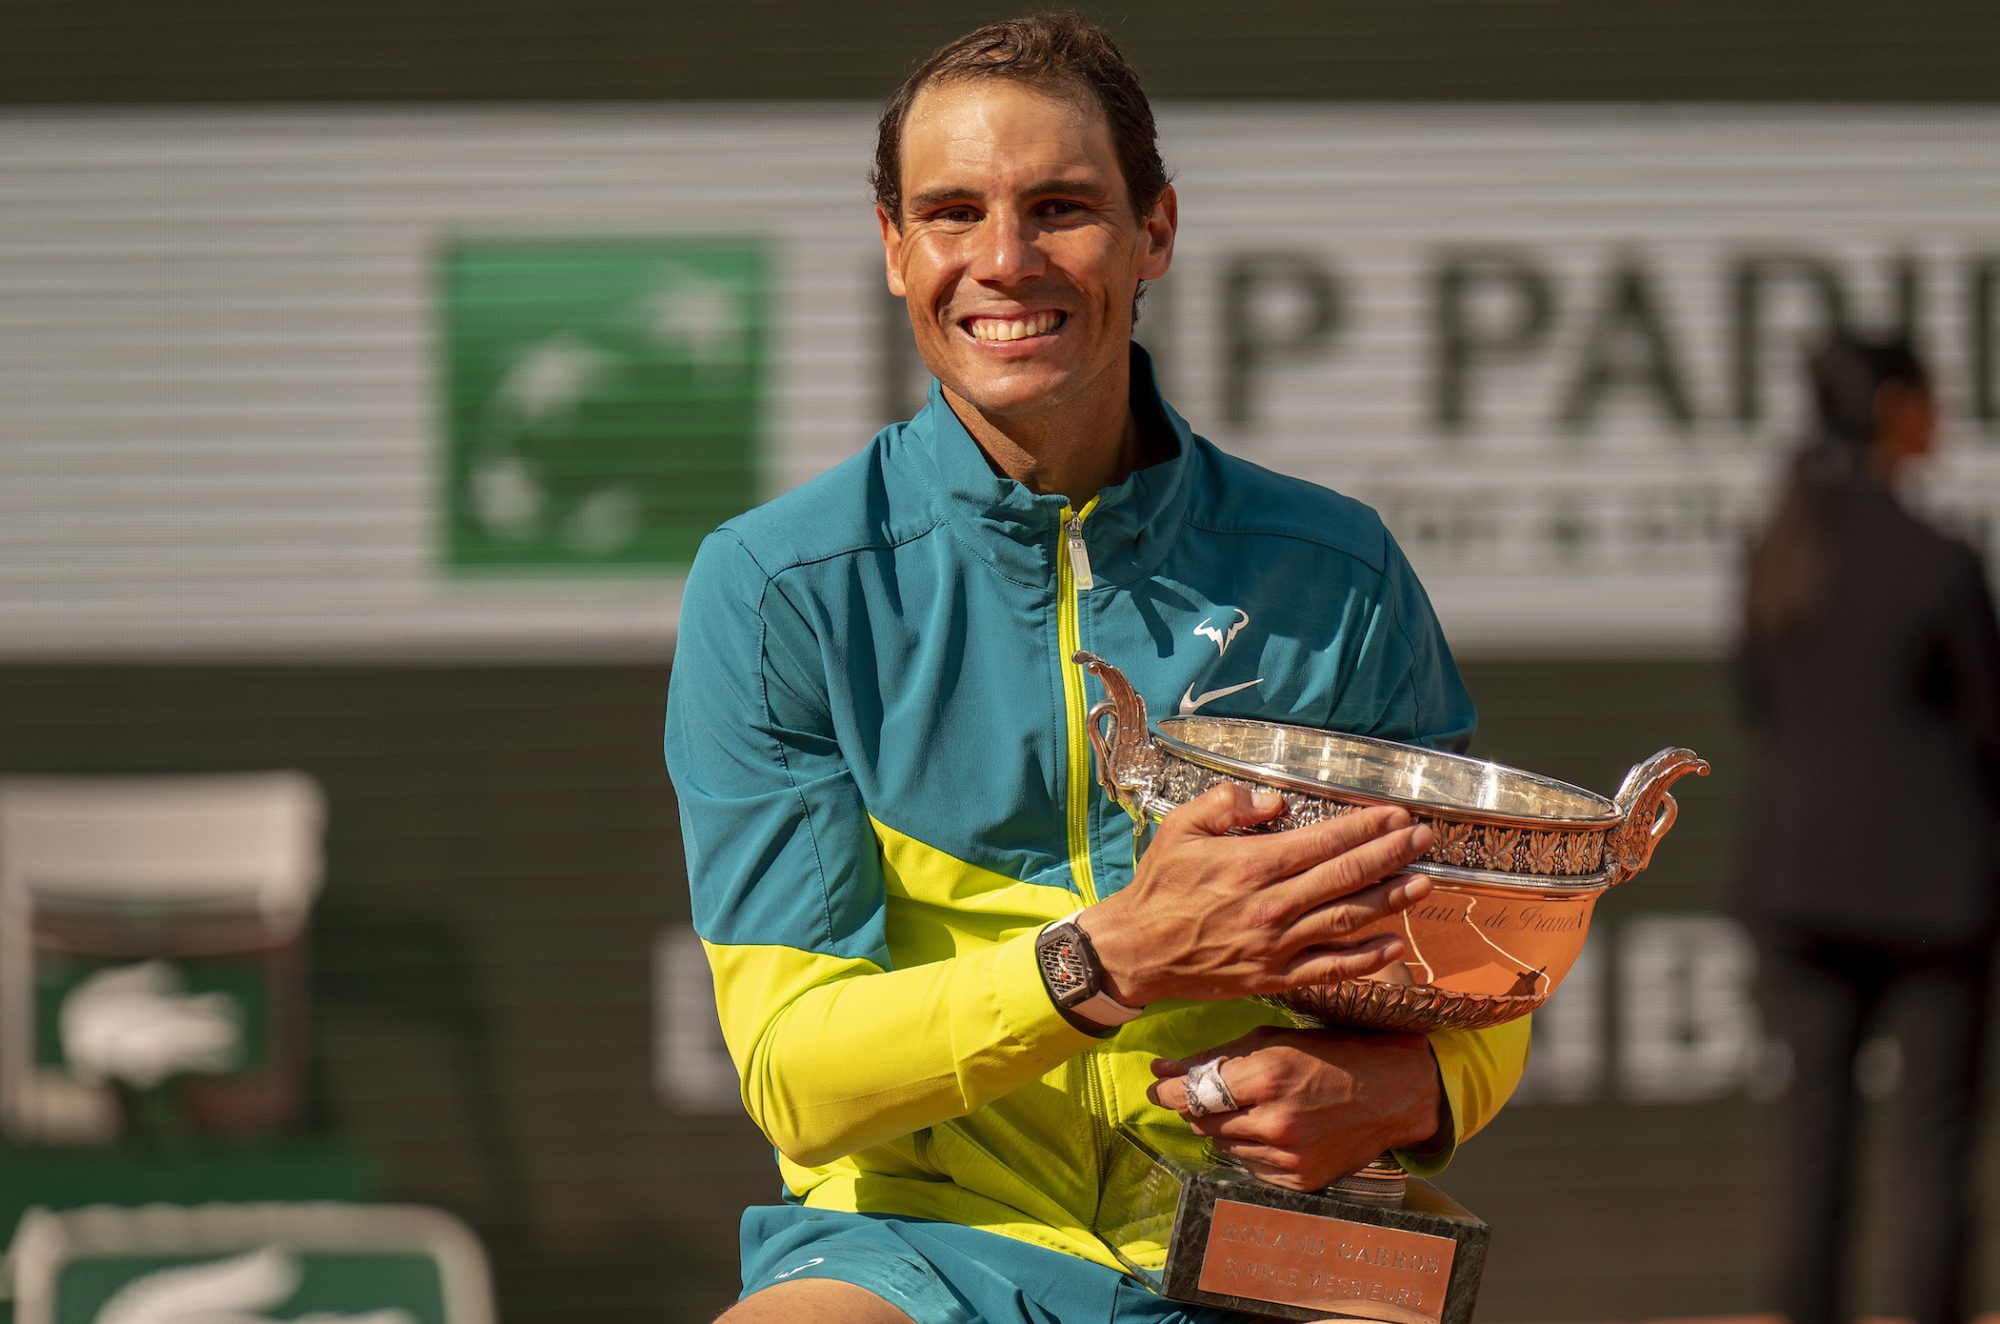 June 5, 2022; Paris, France; Rafael Nadal (ESP) poses with the trophy after winning the men’s singles final against Casper Ruud (NOR) on day 15 of the French Open at Stade Roland-Garros.